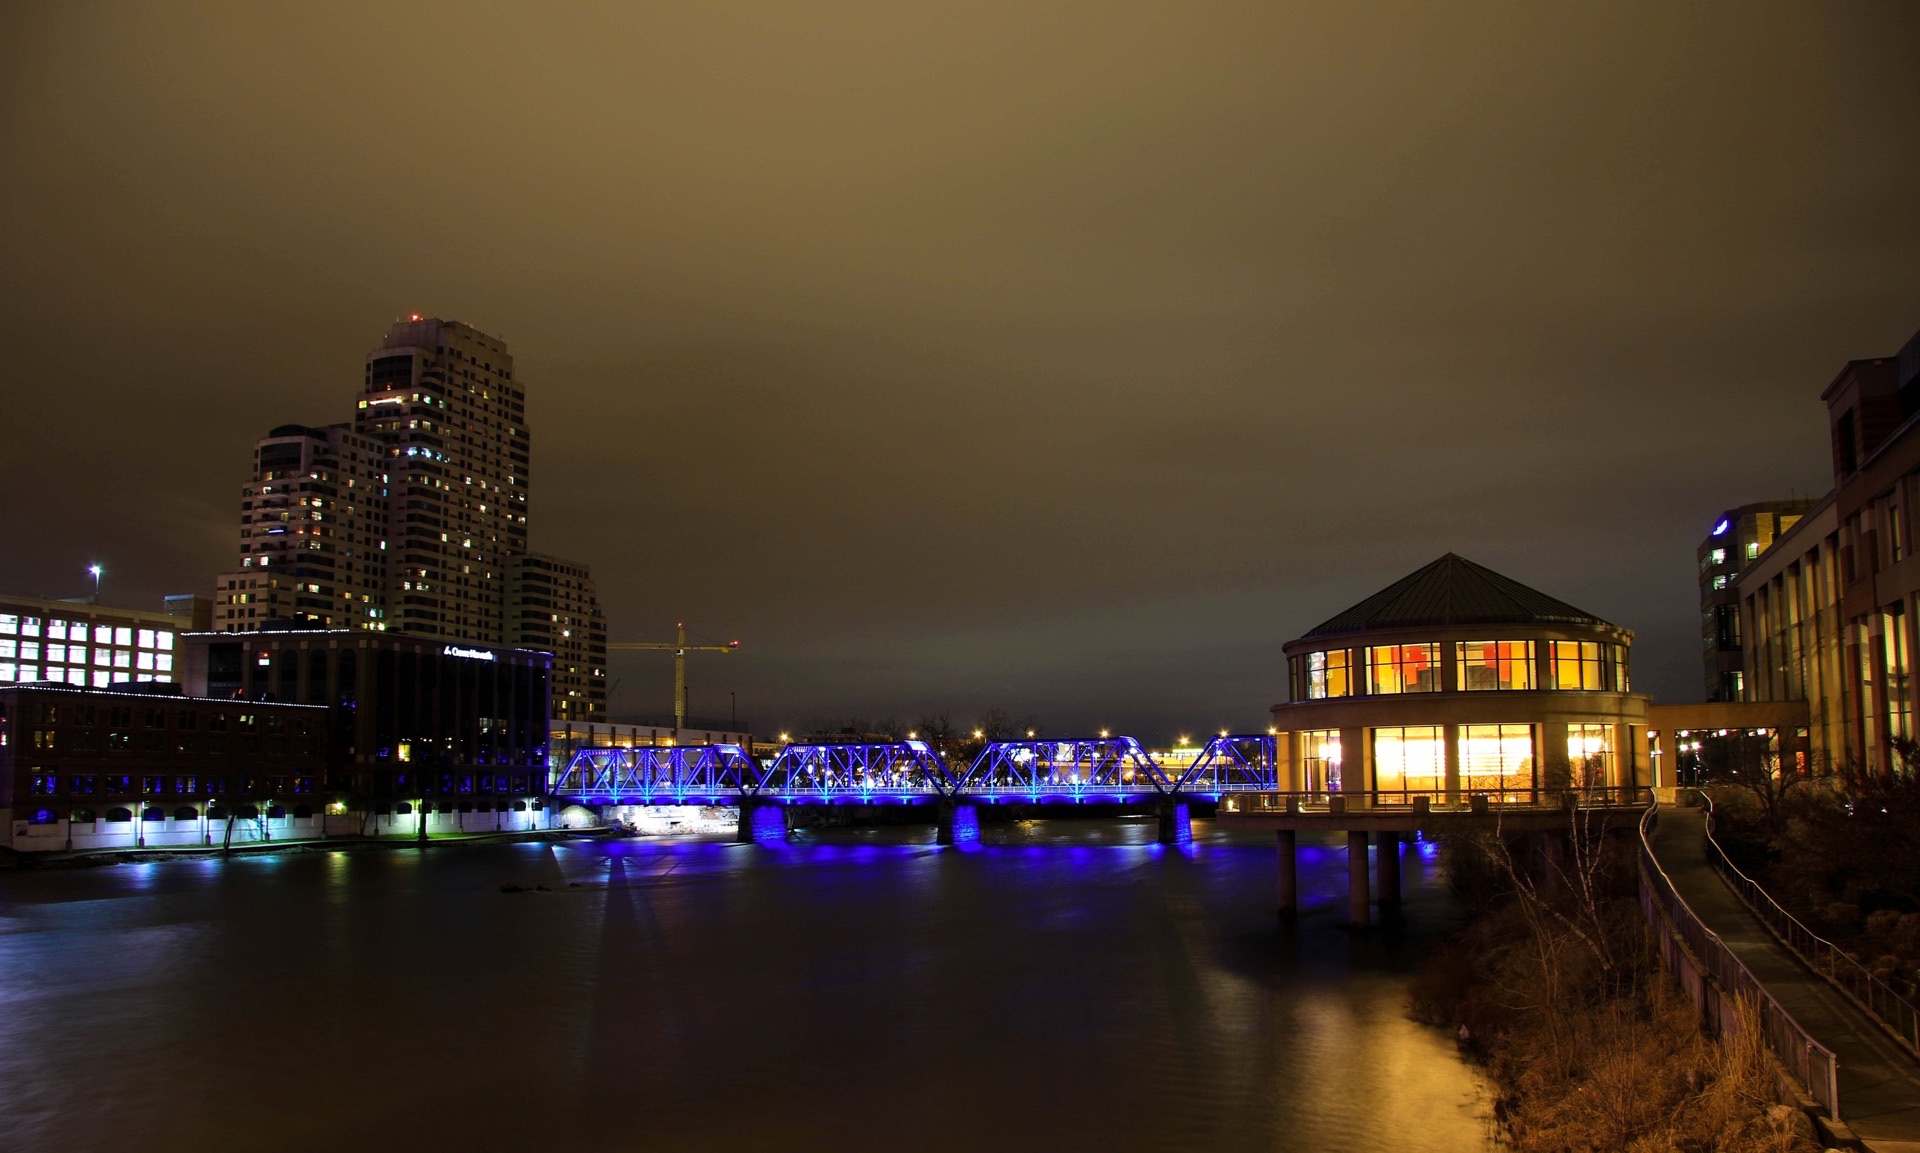 Grand Rapids at night with blue bridgw